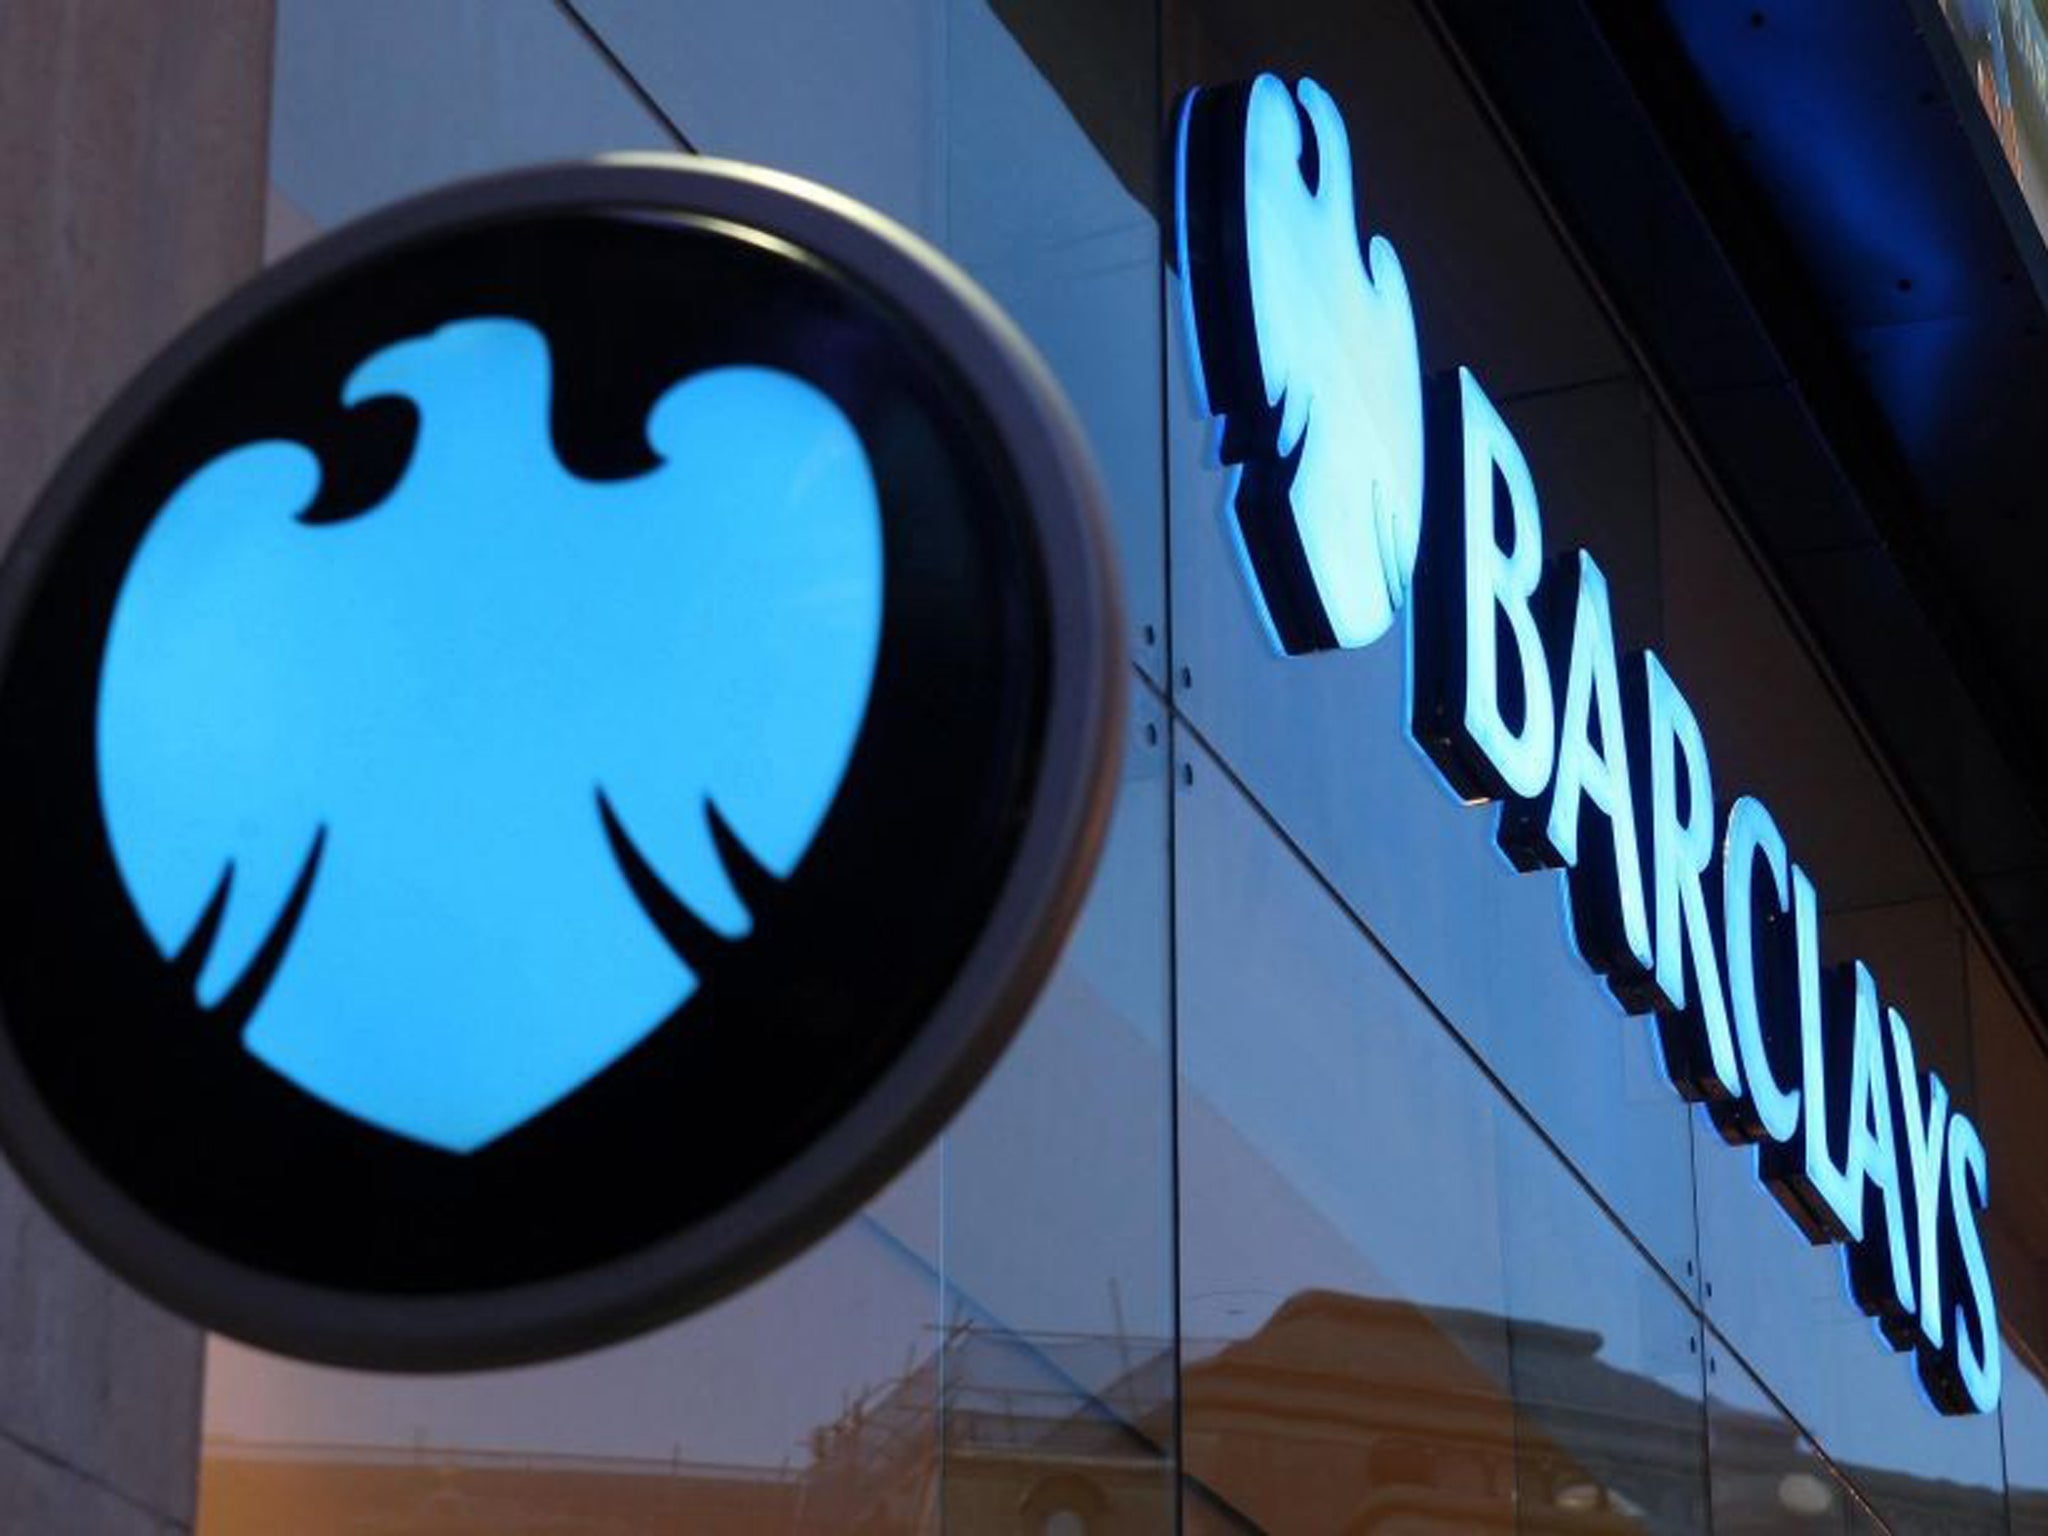 Scandal-hit banking giant Barclays today said it was axing at least 3,700 jobs under a strategic overhaul, but revealed it was paying £1.85 billion in bonuses to staff